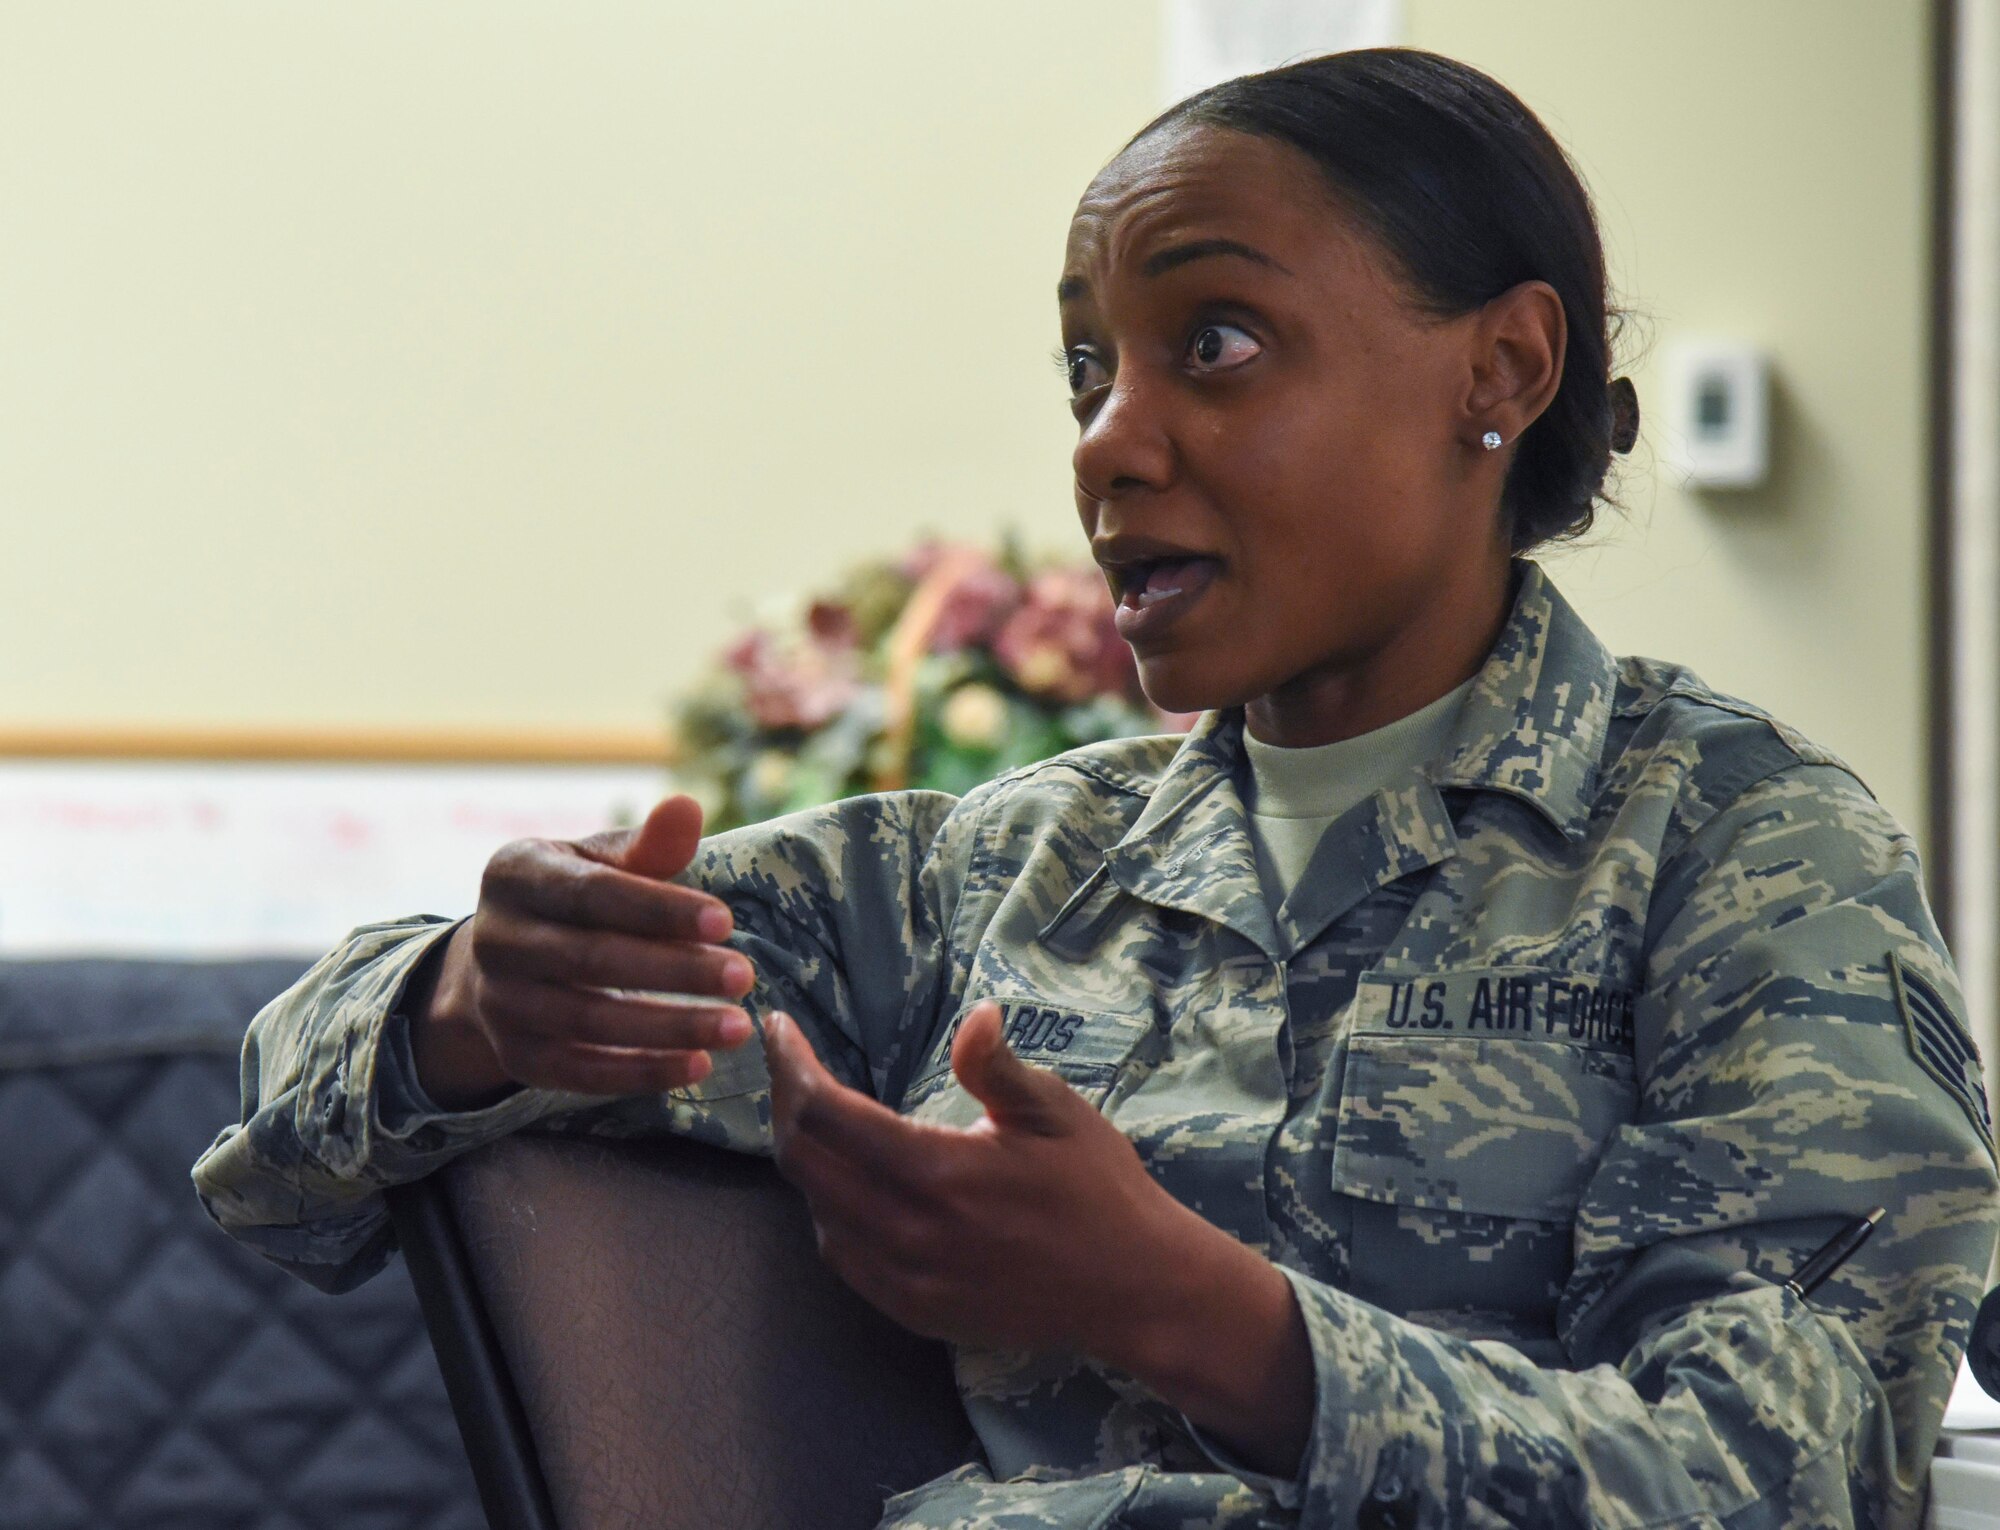 Richards discussed her experiences with base events and how they could be improved. (U.S. Air Force photo by Airman 1st Class Michael D. Mathews)